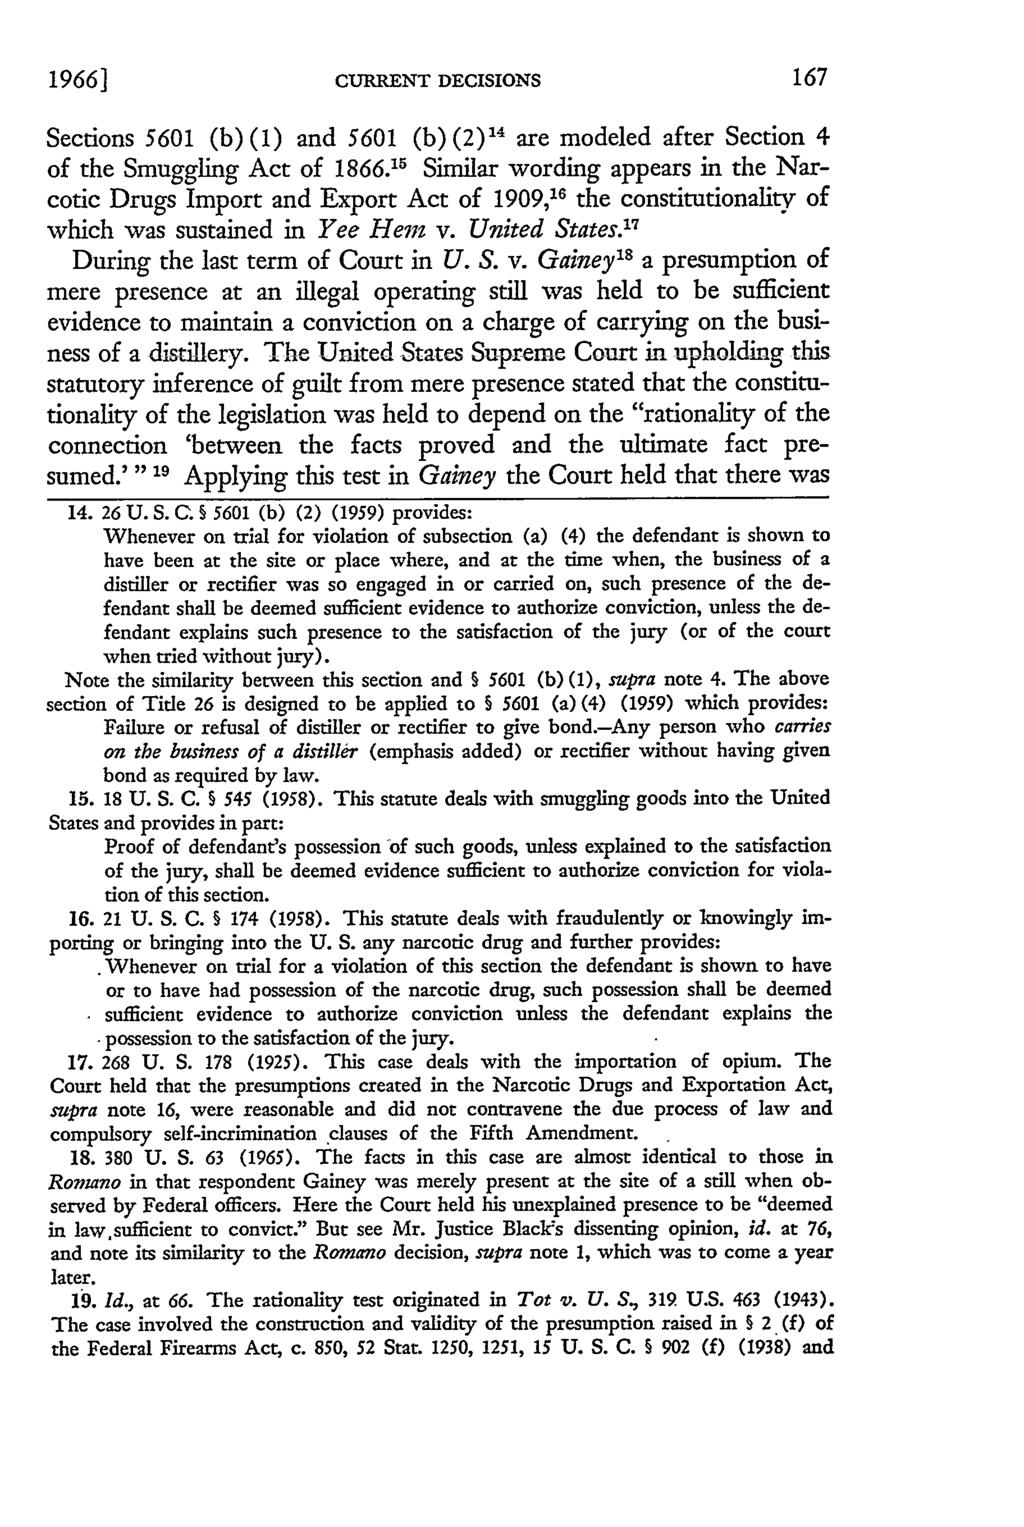 1966] CURRENT DECISIONS Sections 5601 (b) (1) and 5601 (b) (2)'1 are modeled after Section 4 of the Smuggling Act of 1866.